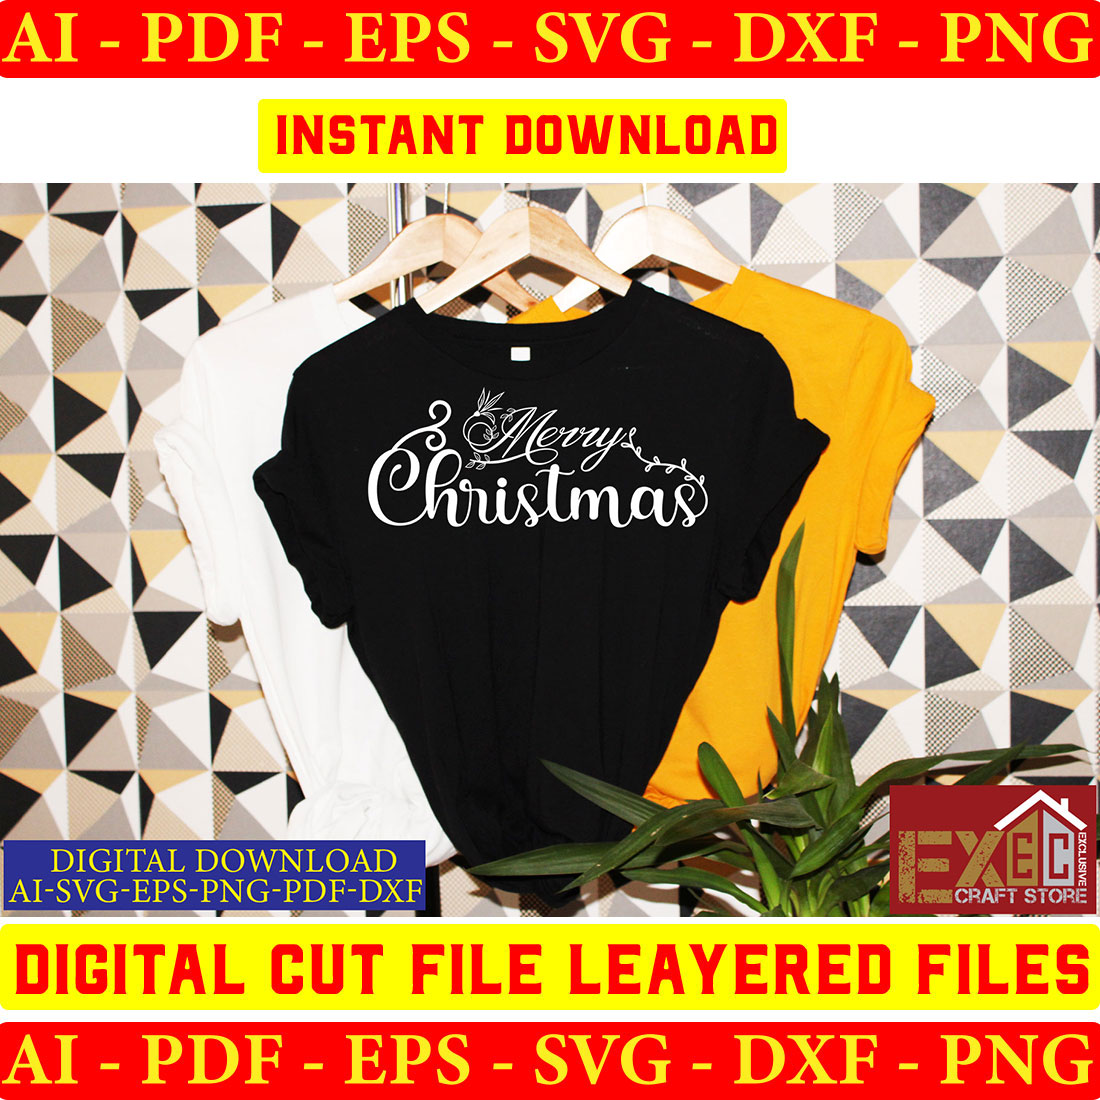 Black and yellow shirt with a merry christmas message on it.